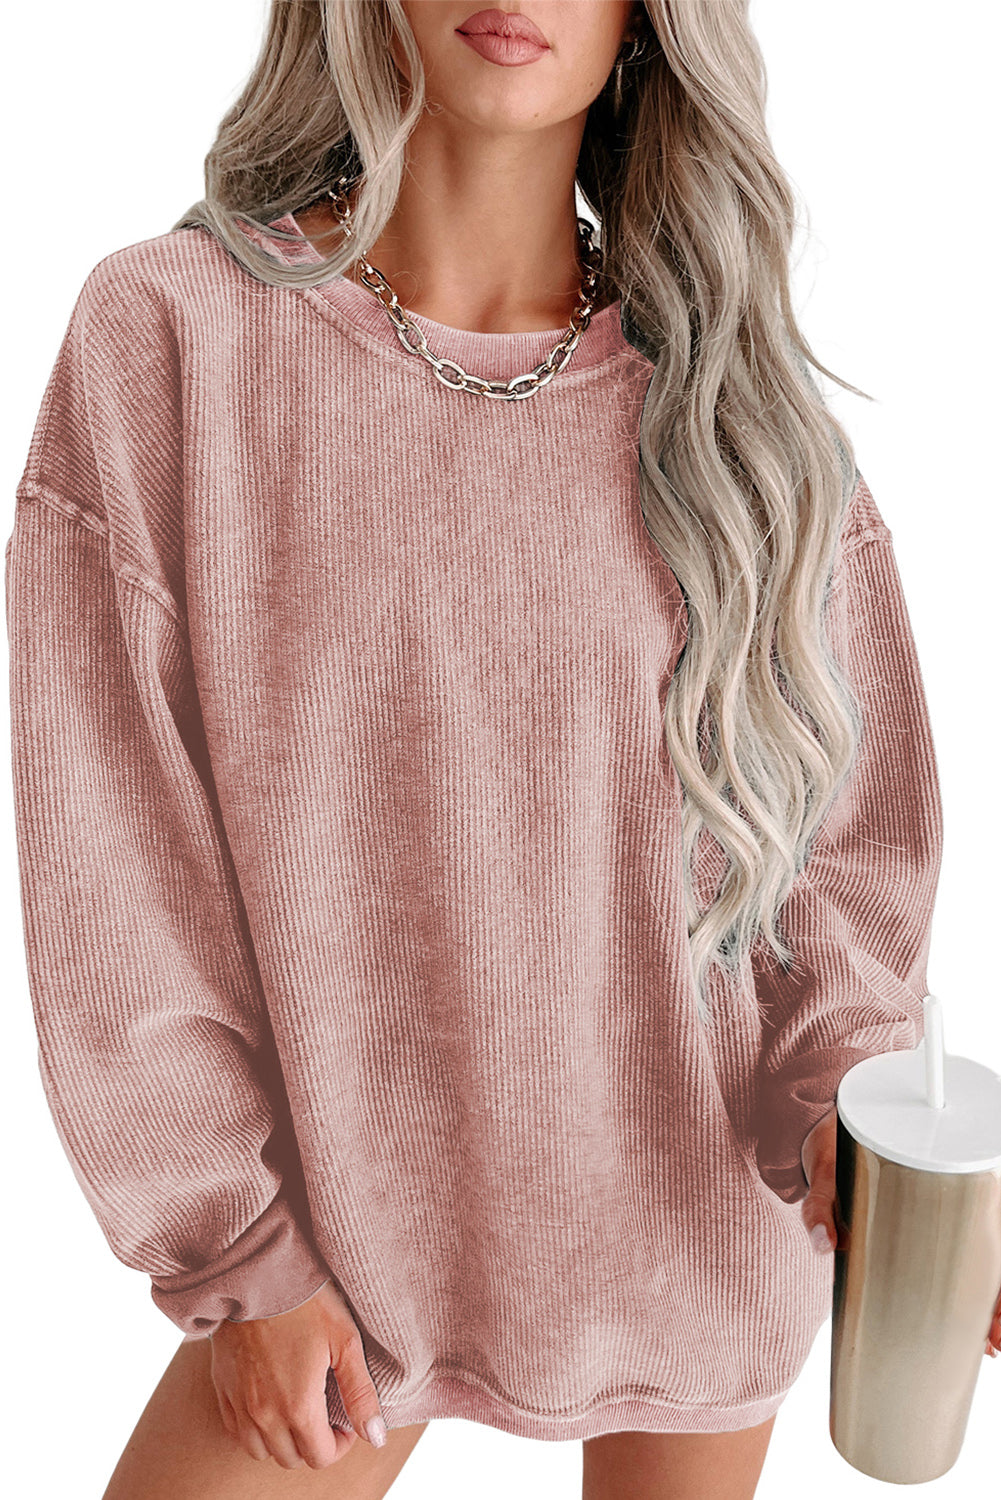 Cali Chic Women Sweatshirt Pink Solid Ribbed Knit Round Neck Pullover